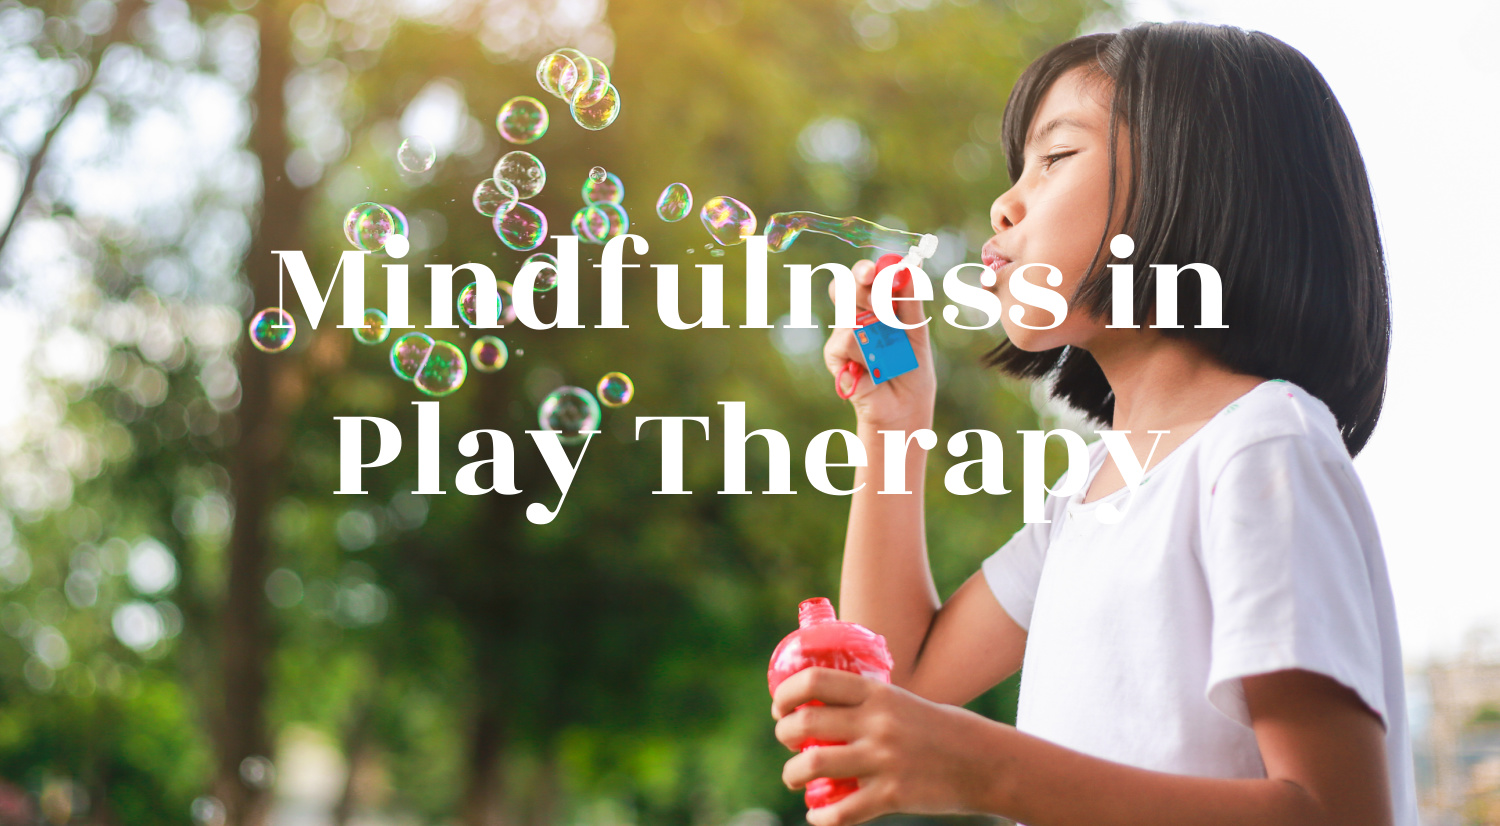 Mindfulness in play therapy